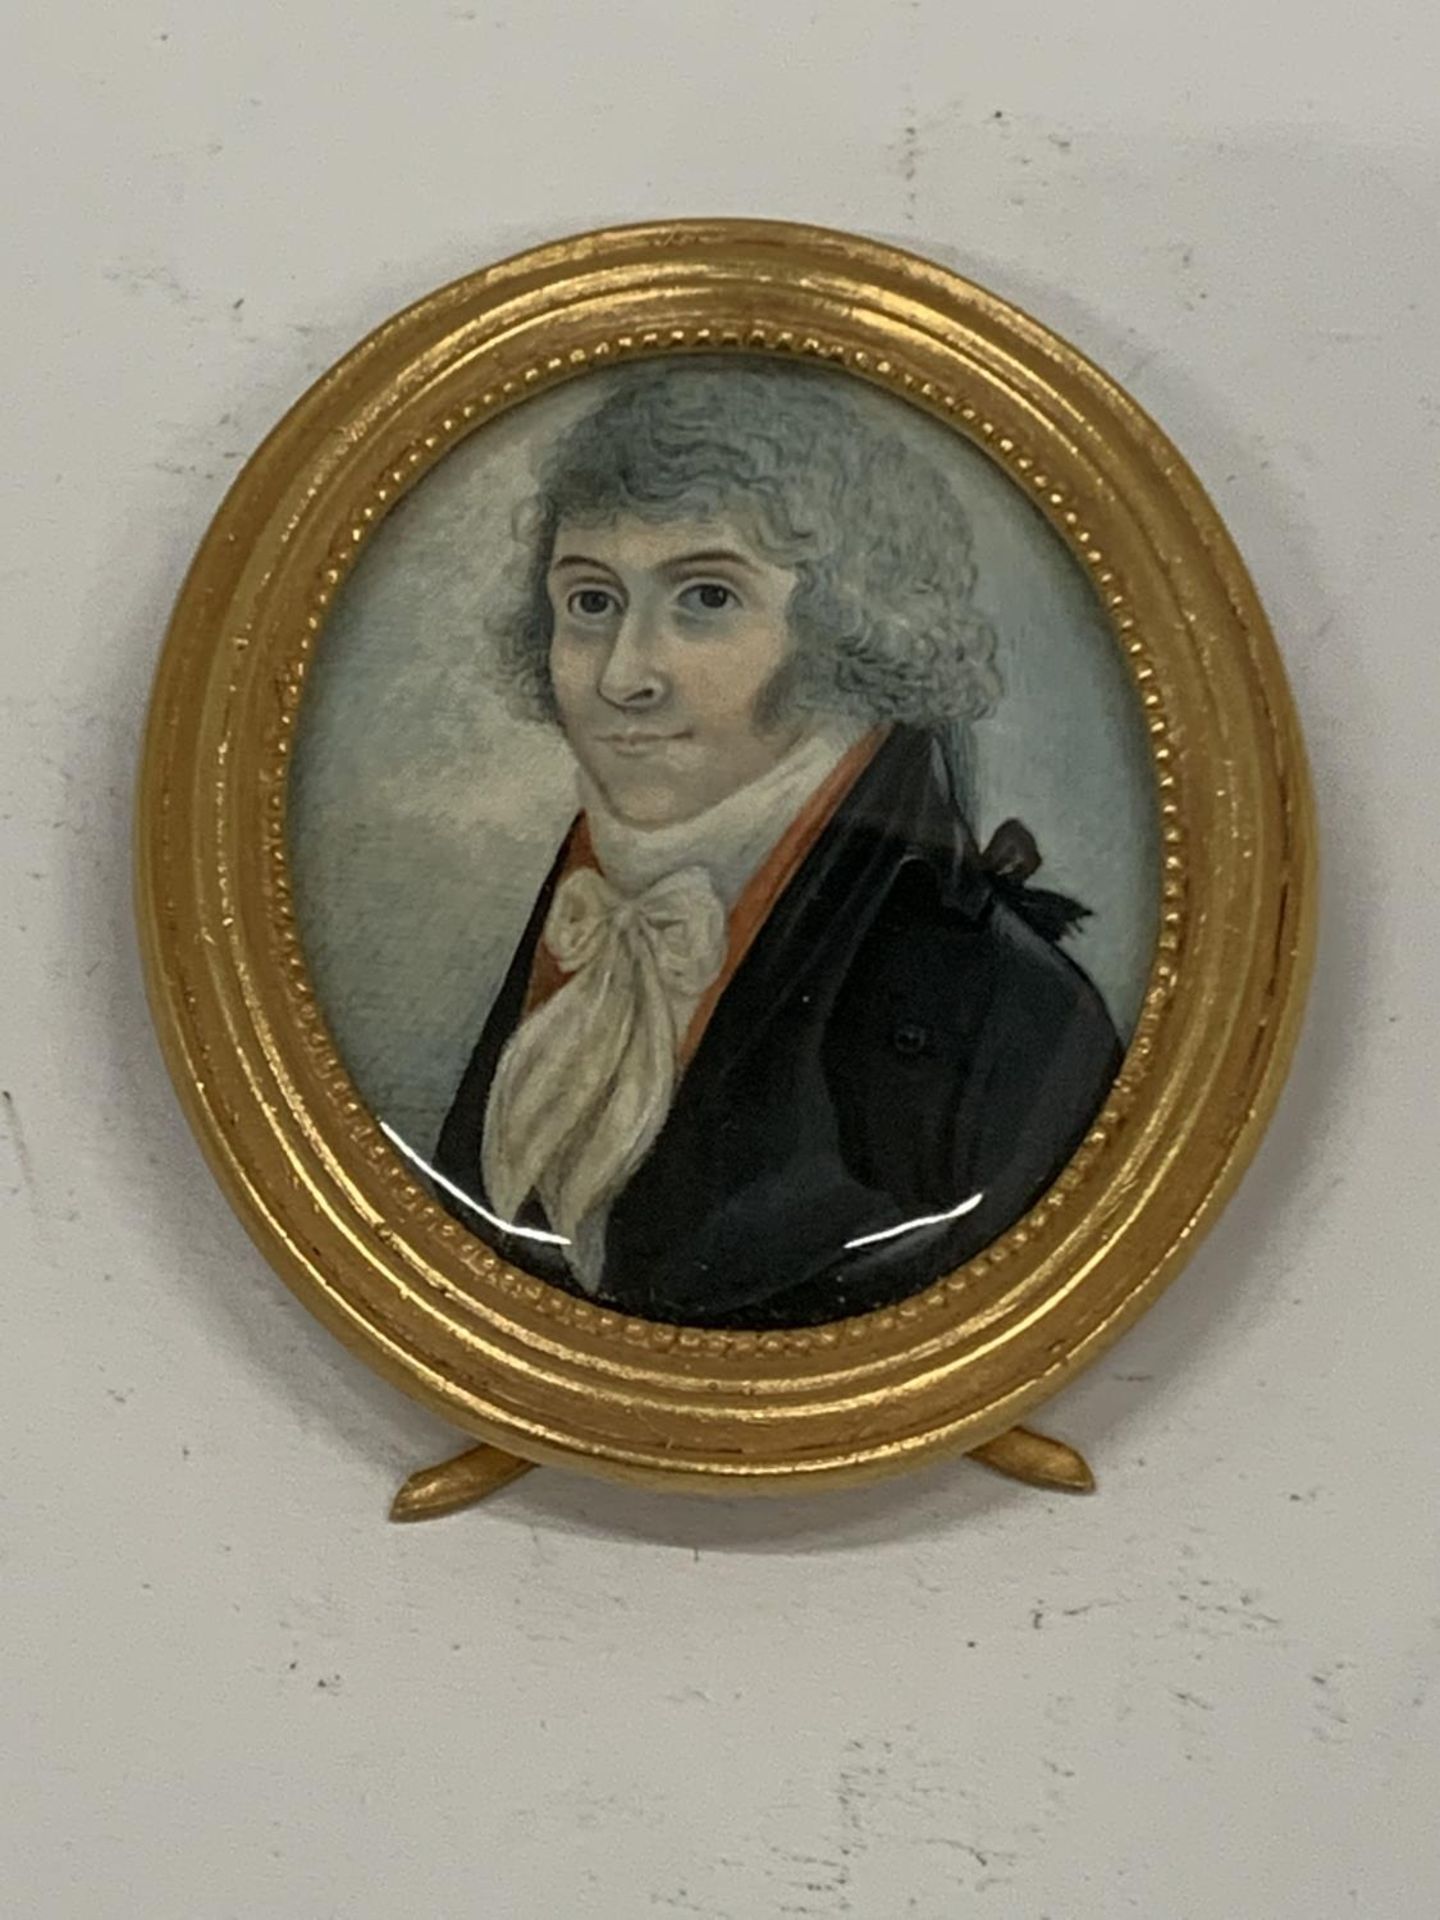 AN 18TH/19TH CENTURY PORTRAIT MINIATURE IN GILT EASEL FRAME, LENGTH 7CM - Image 2 of 4